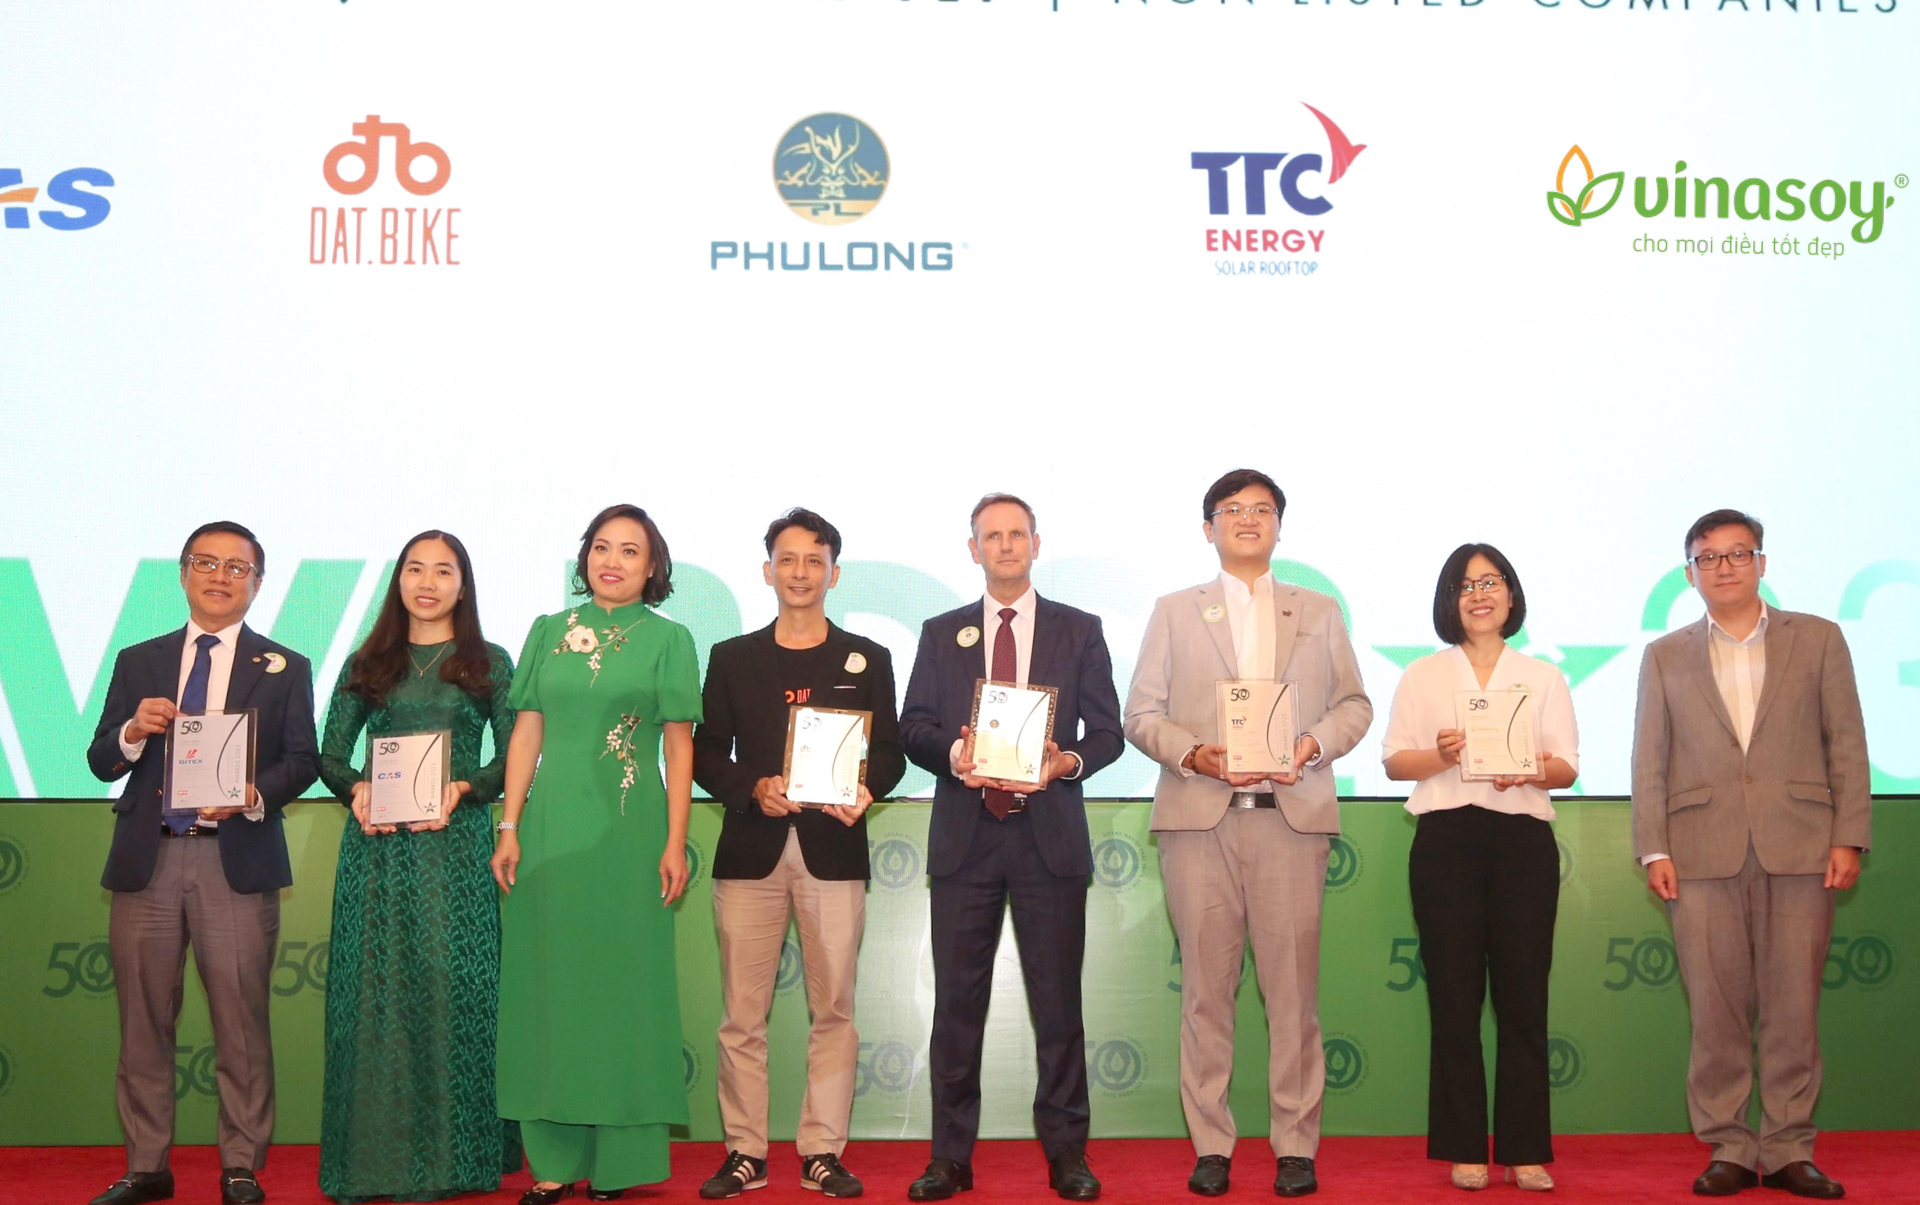 Vinasoy was honoured with the Top 50 Corporate Sustainability Award 2023